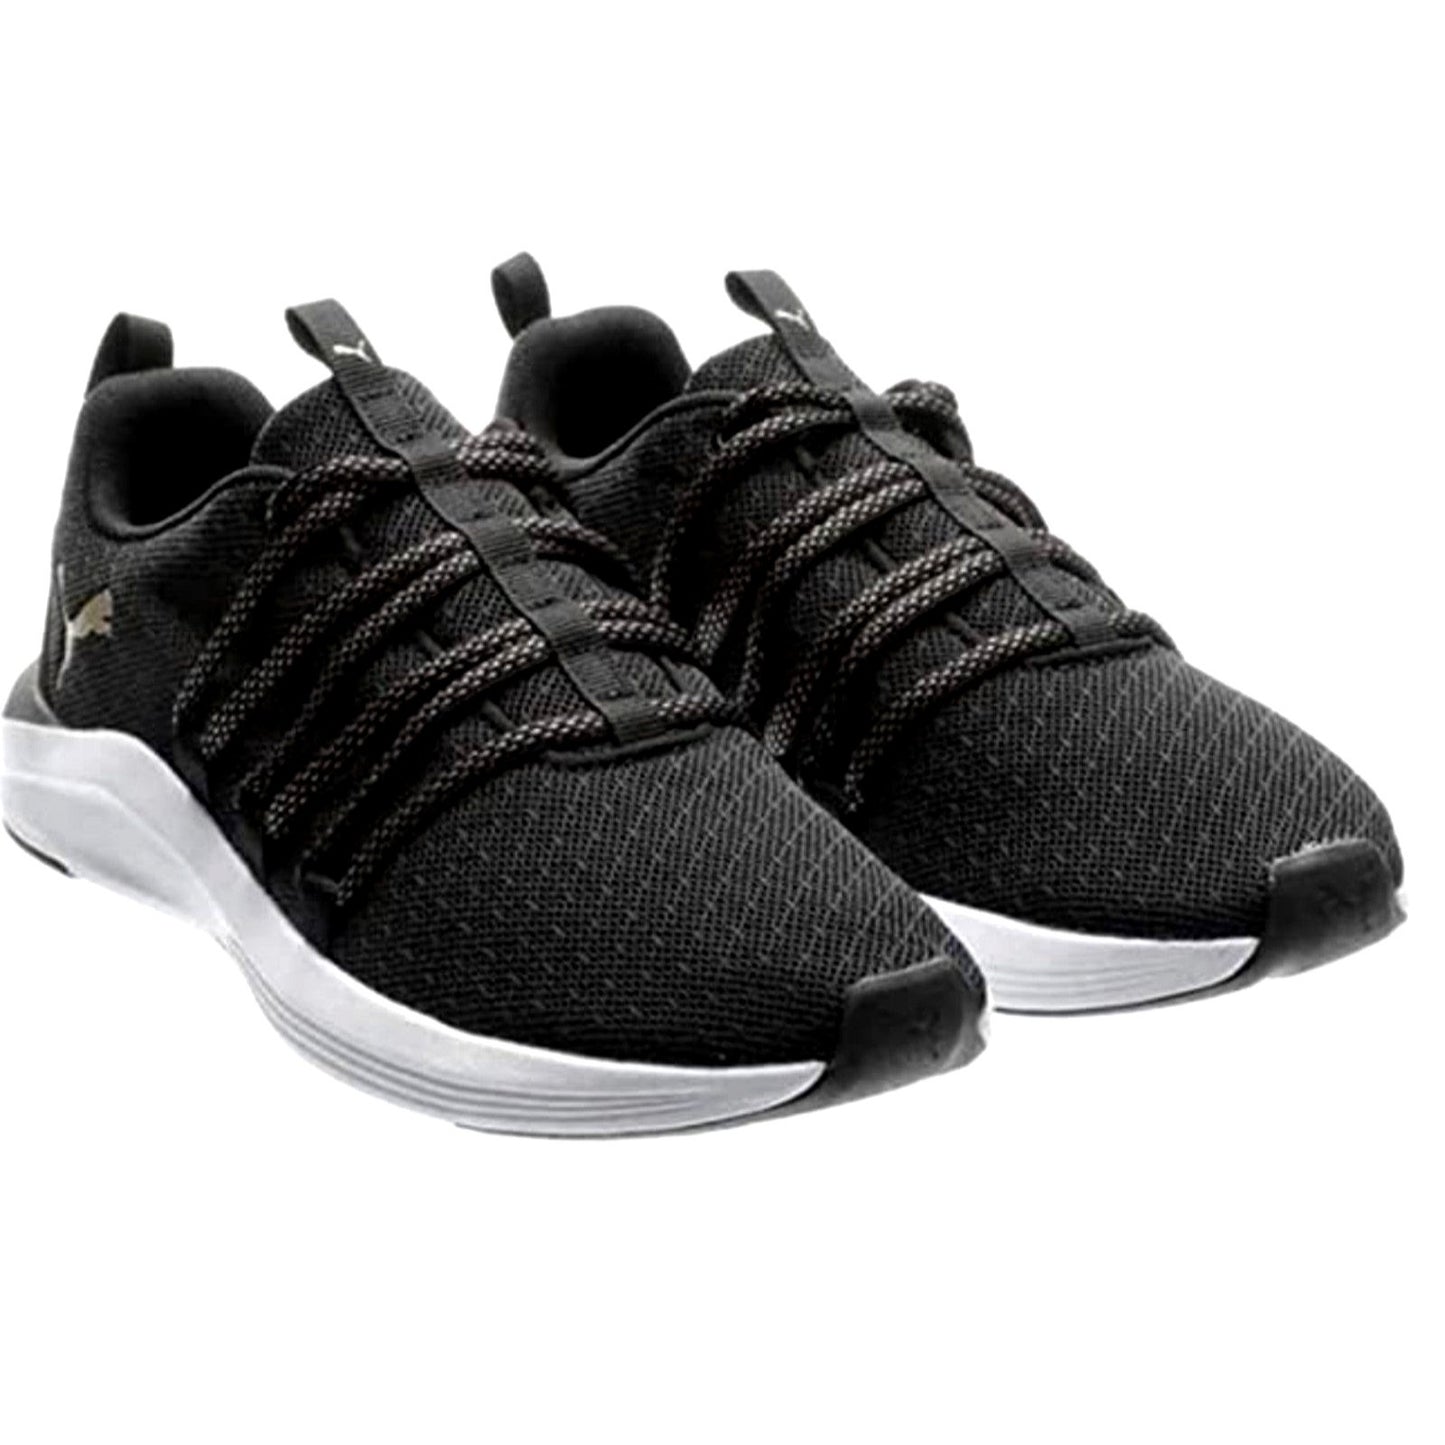 PUMA Athletic Sneakers Prowl Knit Woman's Lace-up Activewear shoes